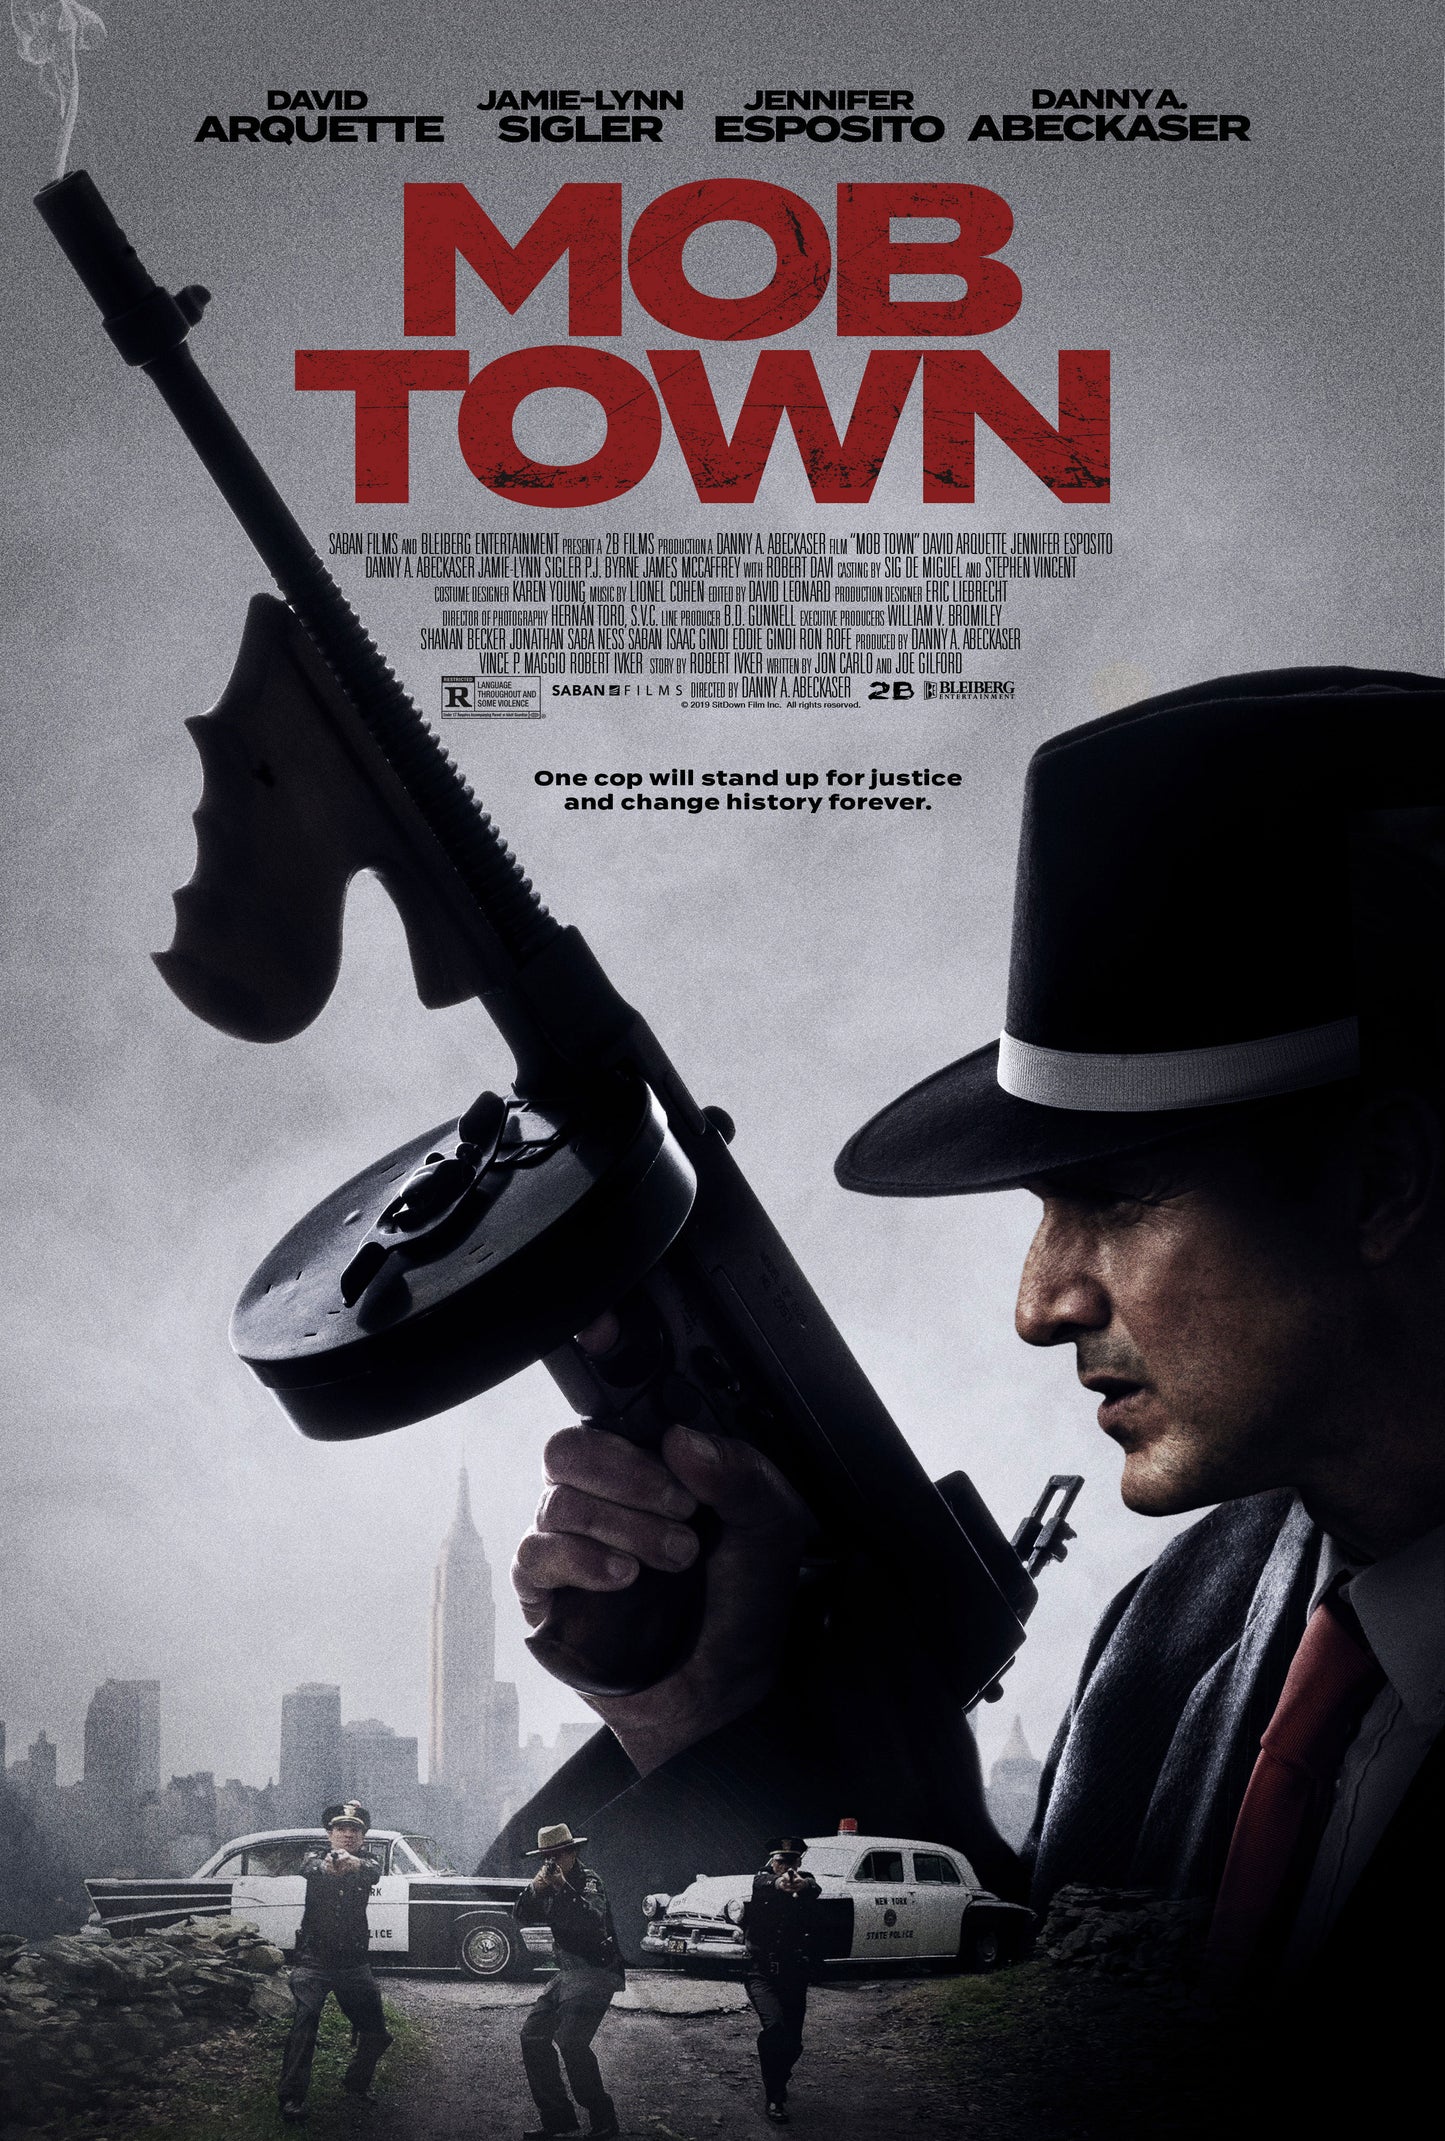 Mob Town cover art